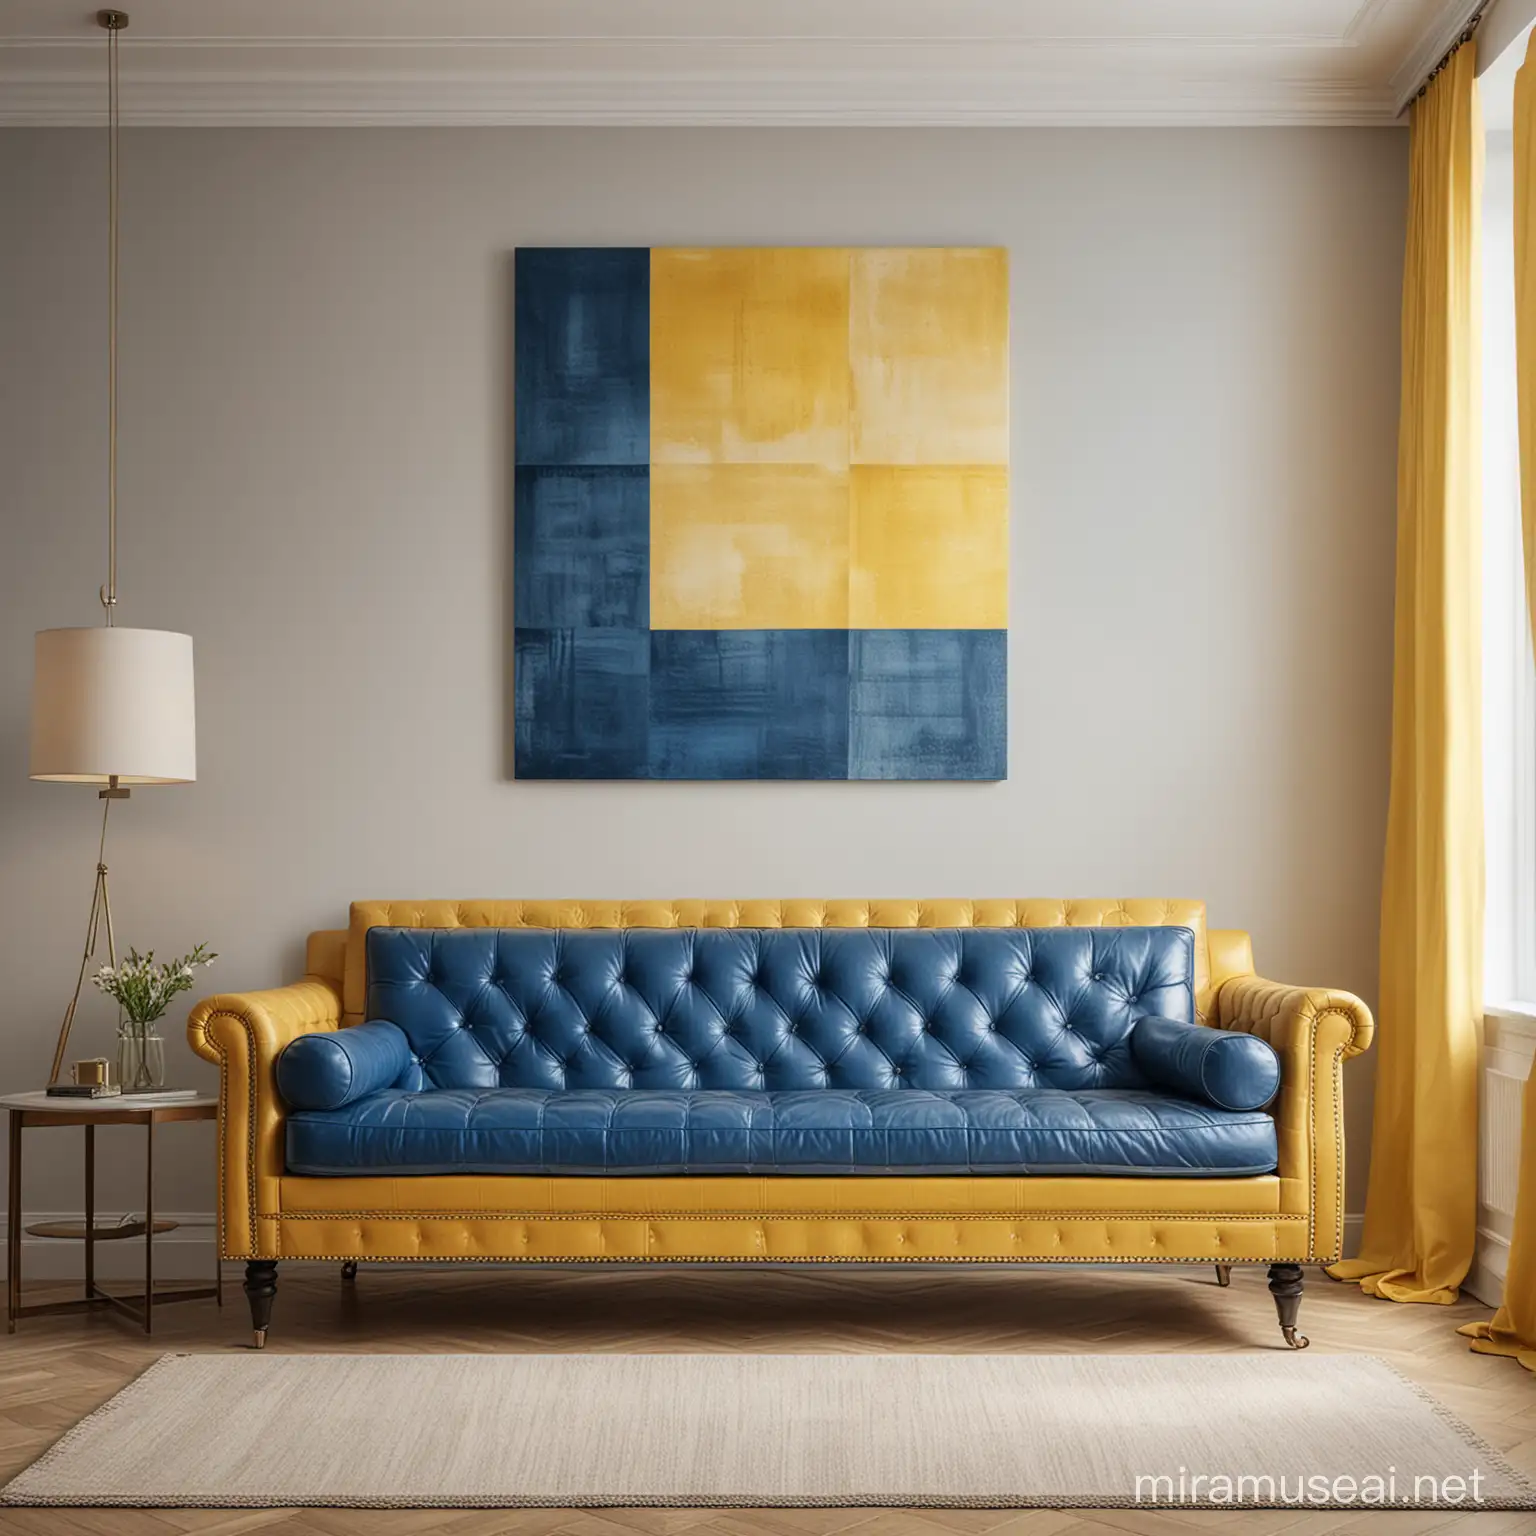 Cozy Living Room with Blue Leather Sofa and Vibrant Wall Art